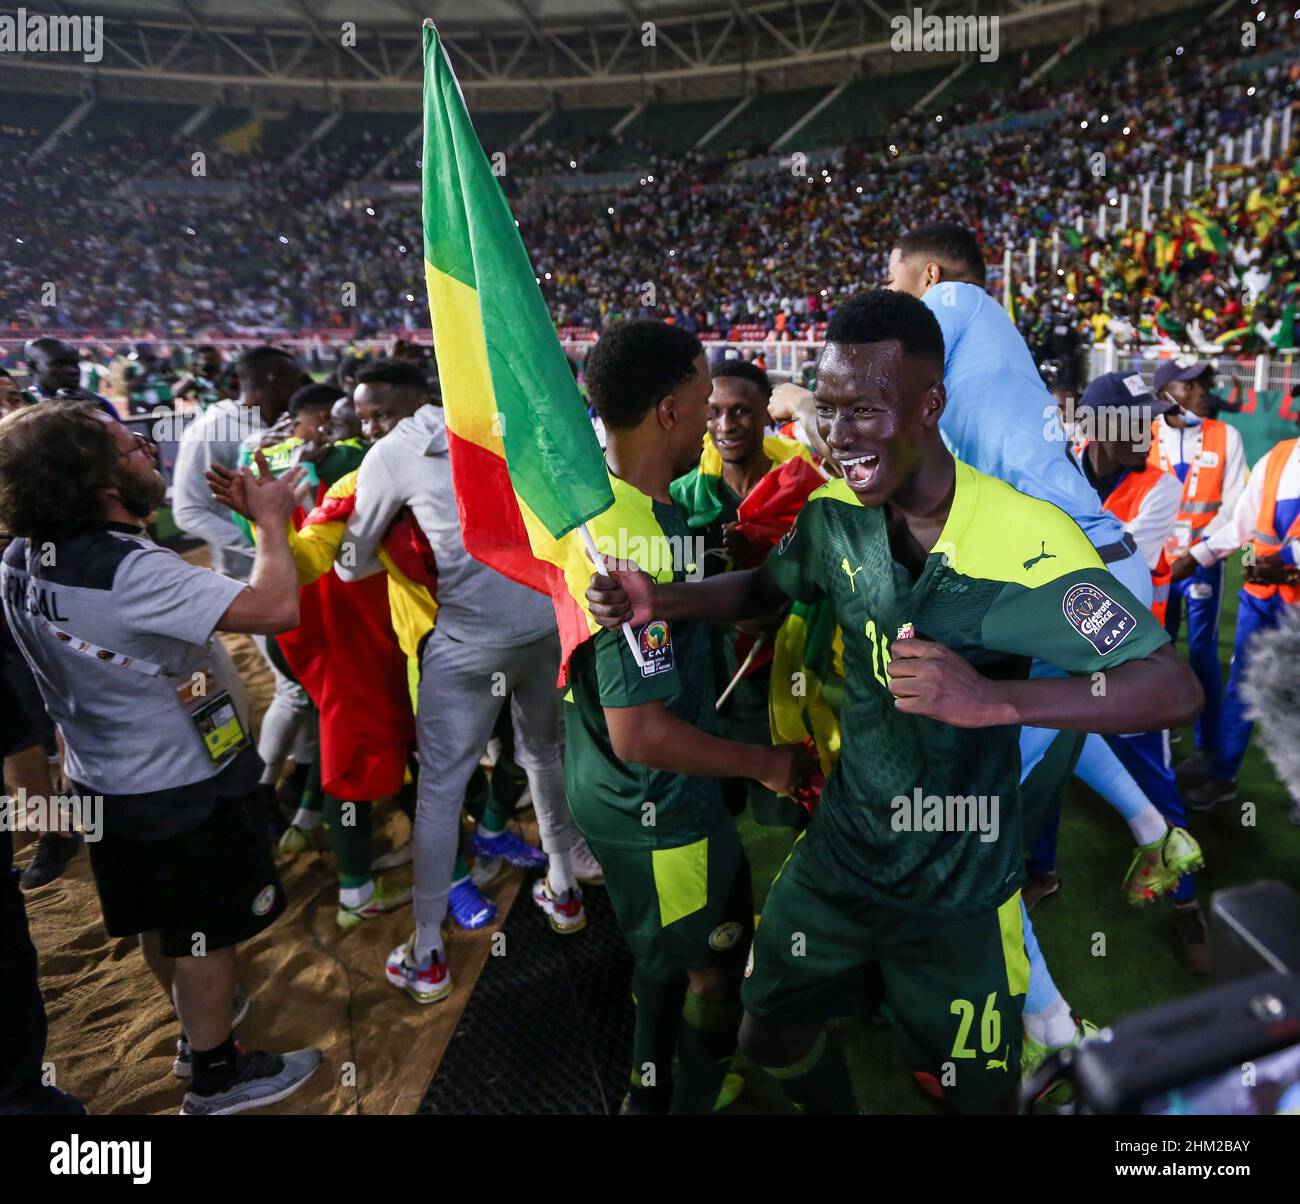 CAMEROON, Yaounde, February 06 2022 - Pape Gueye of Senegal celebrates during the Africa Cup of Nations Final between Senegal and Egypt at Stade d'Olembe, Yaounde, CMR 06/02/2022 Photo SFSI Credit: Sebo47/Alamy Live News Stock Photo